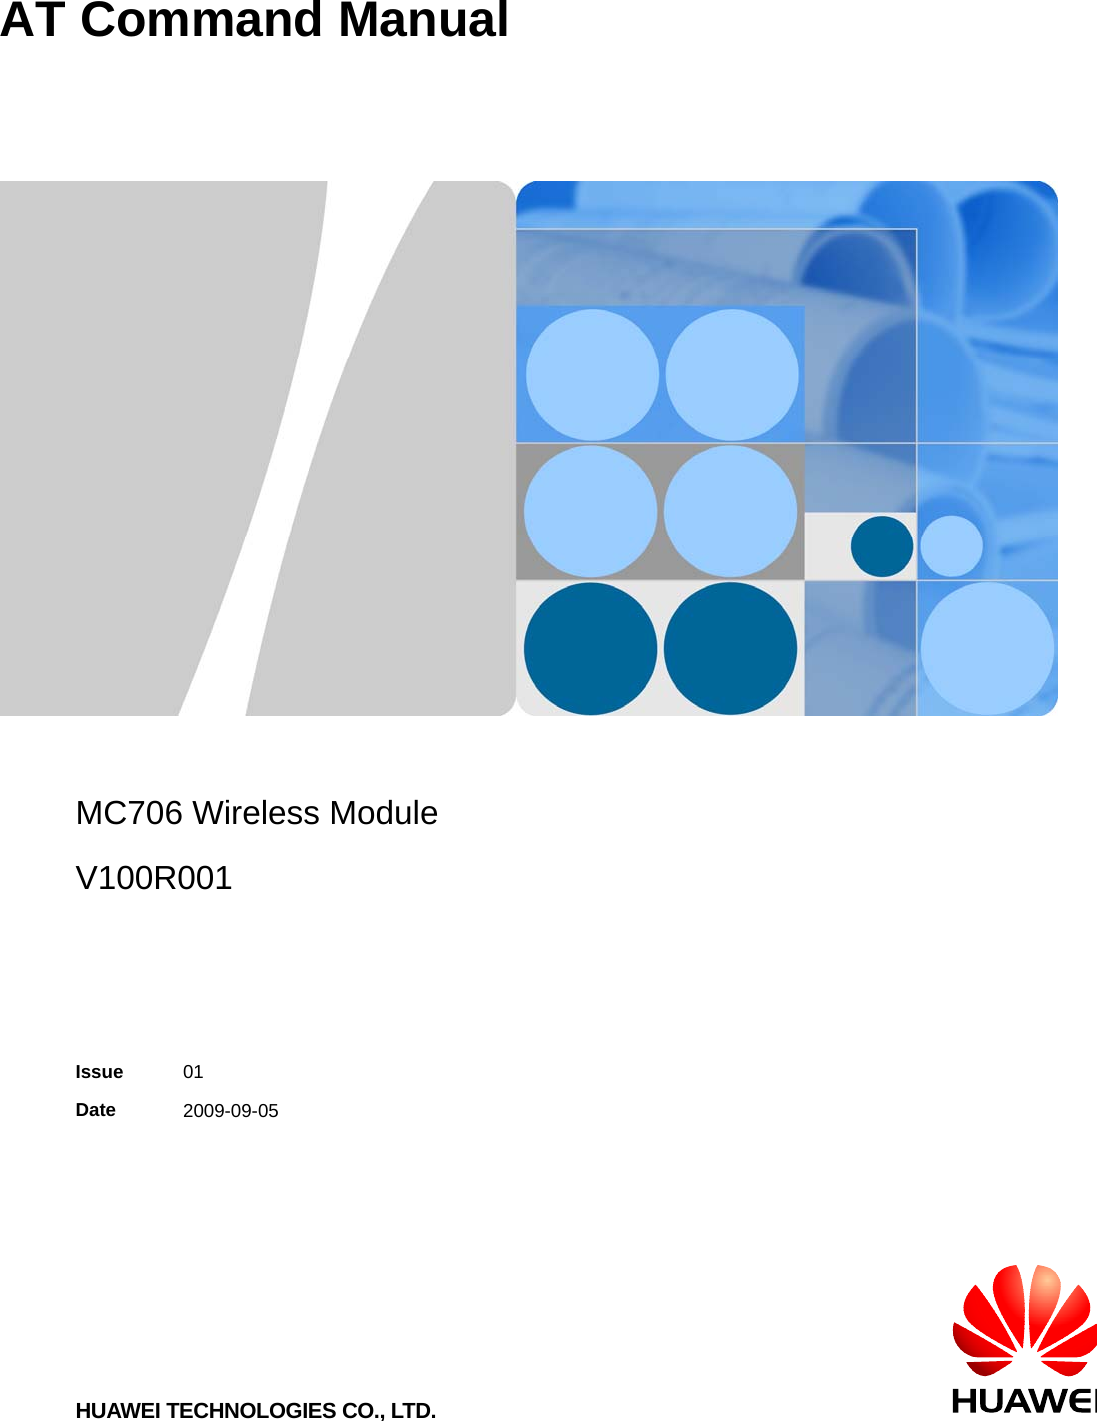  AT Command Manual   MC706 Wireless Module V100R001  Issue  01 Date  2009-09-05  HUAWEI TECHNOLOGIES CO., LTD.   